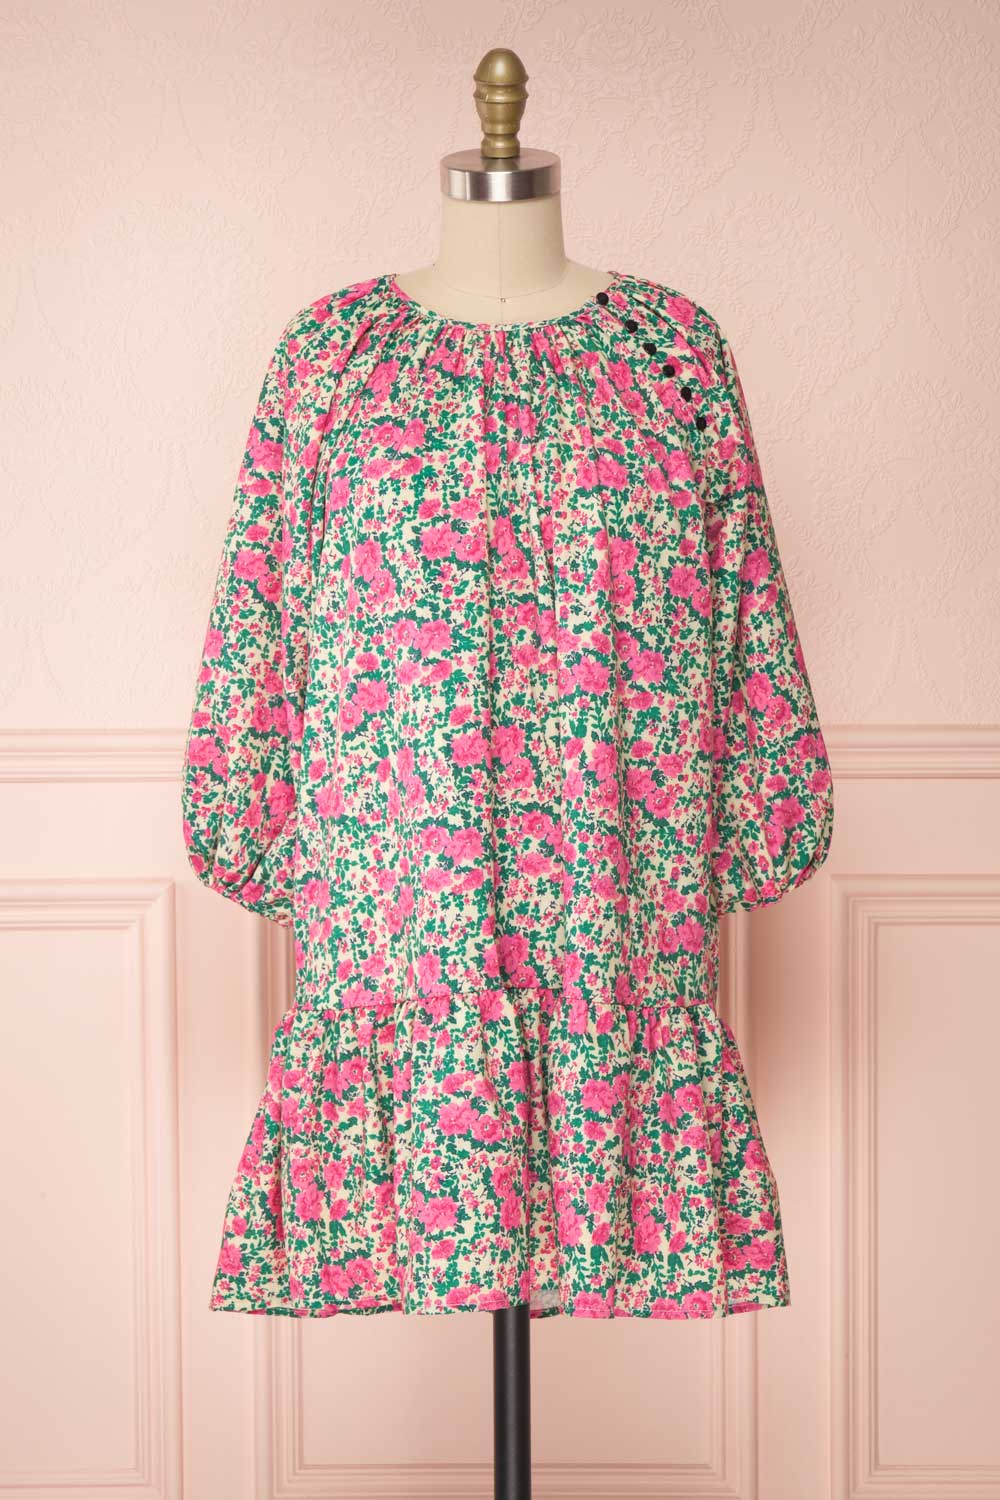 Oxomoco Pink & Green Floral Short Dress | Boutique 1861 front view